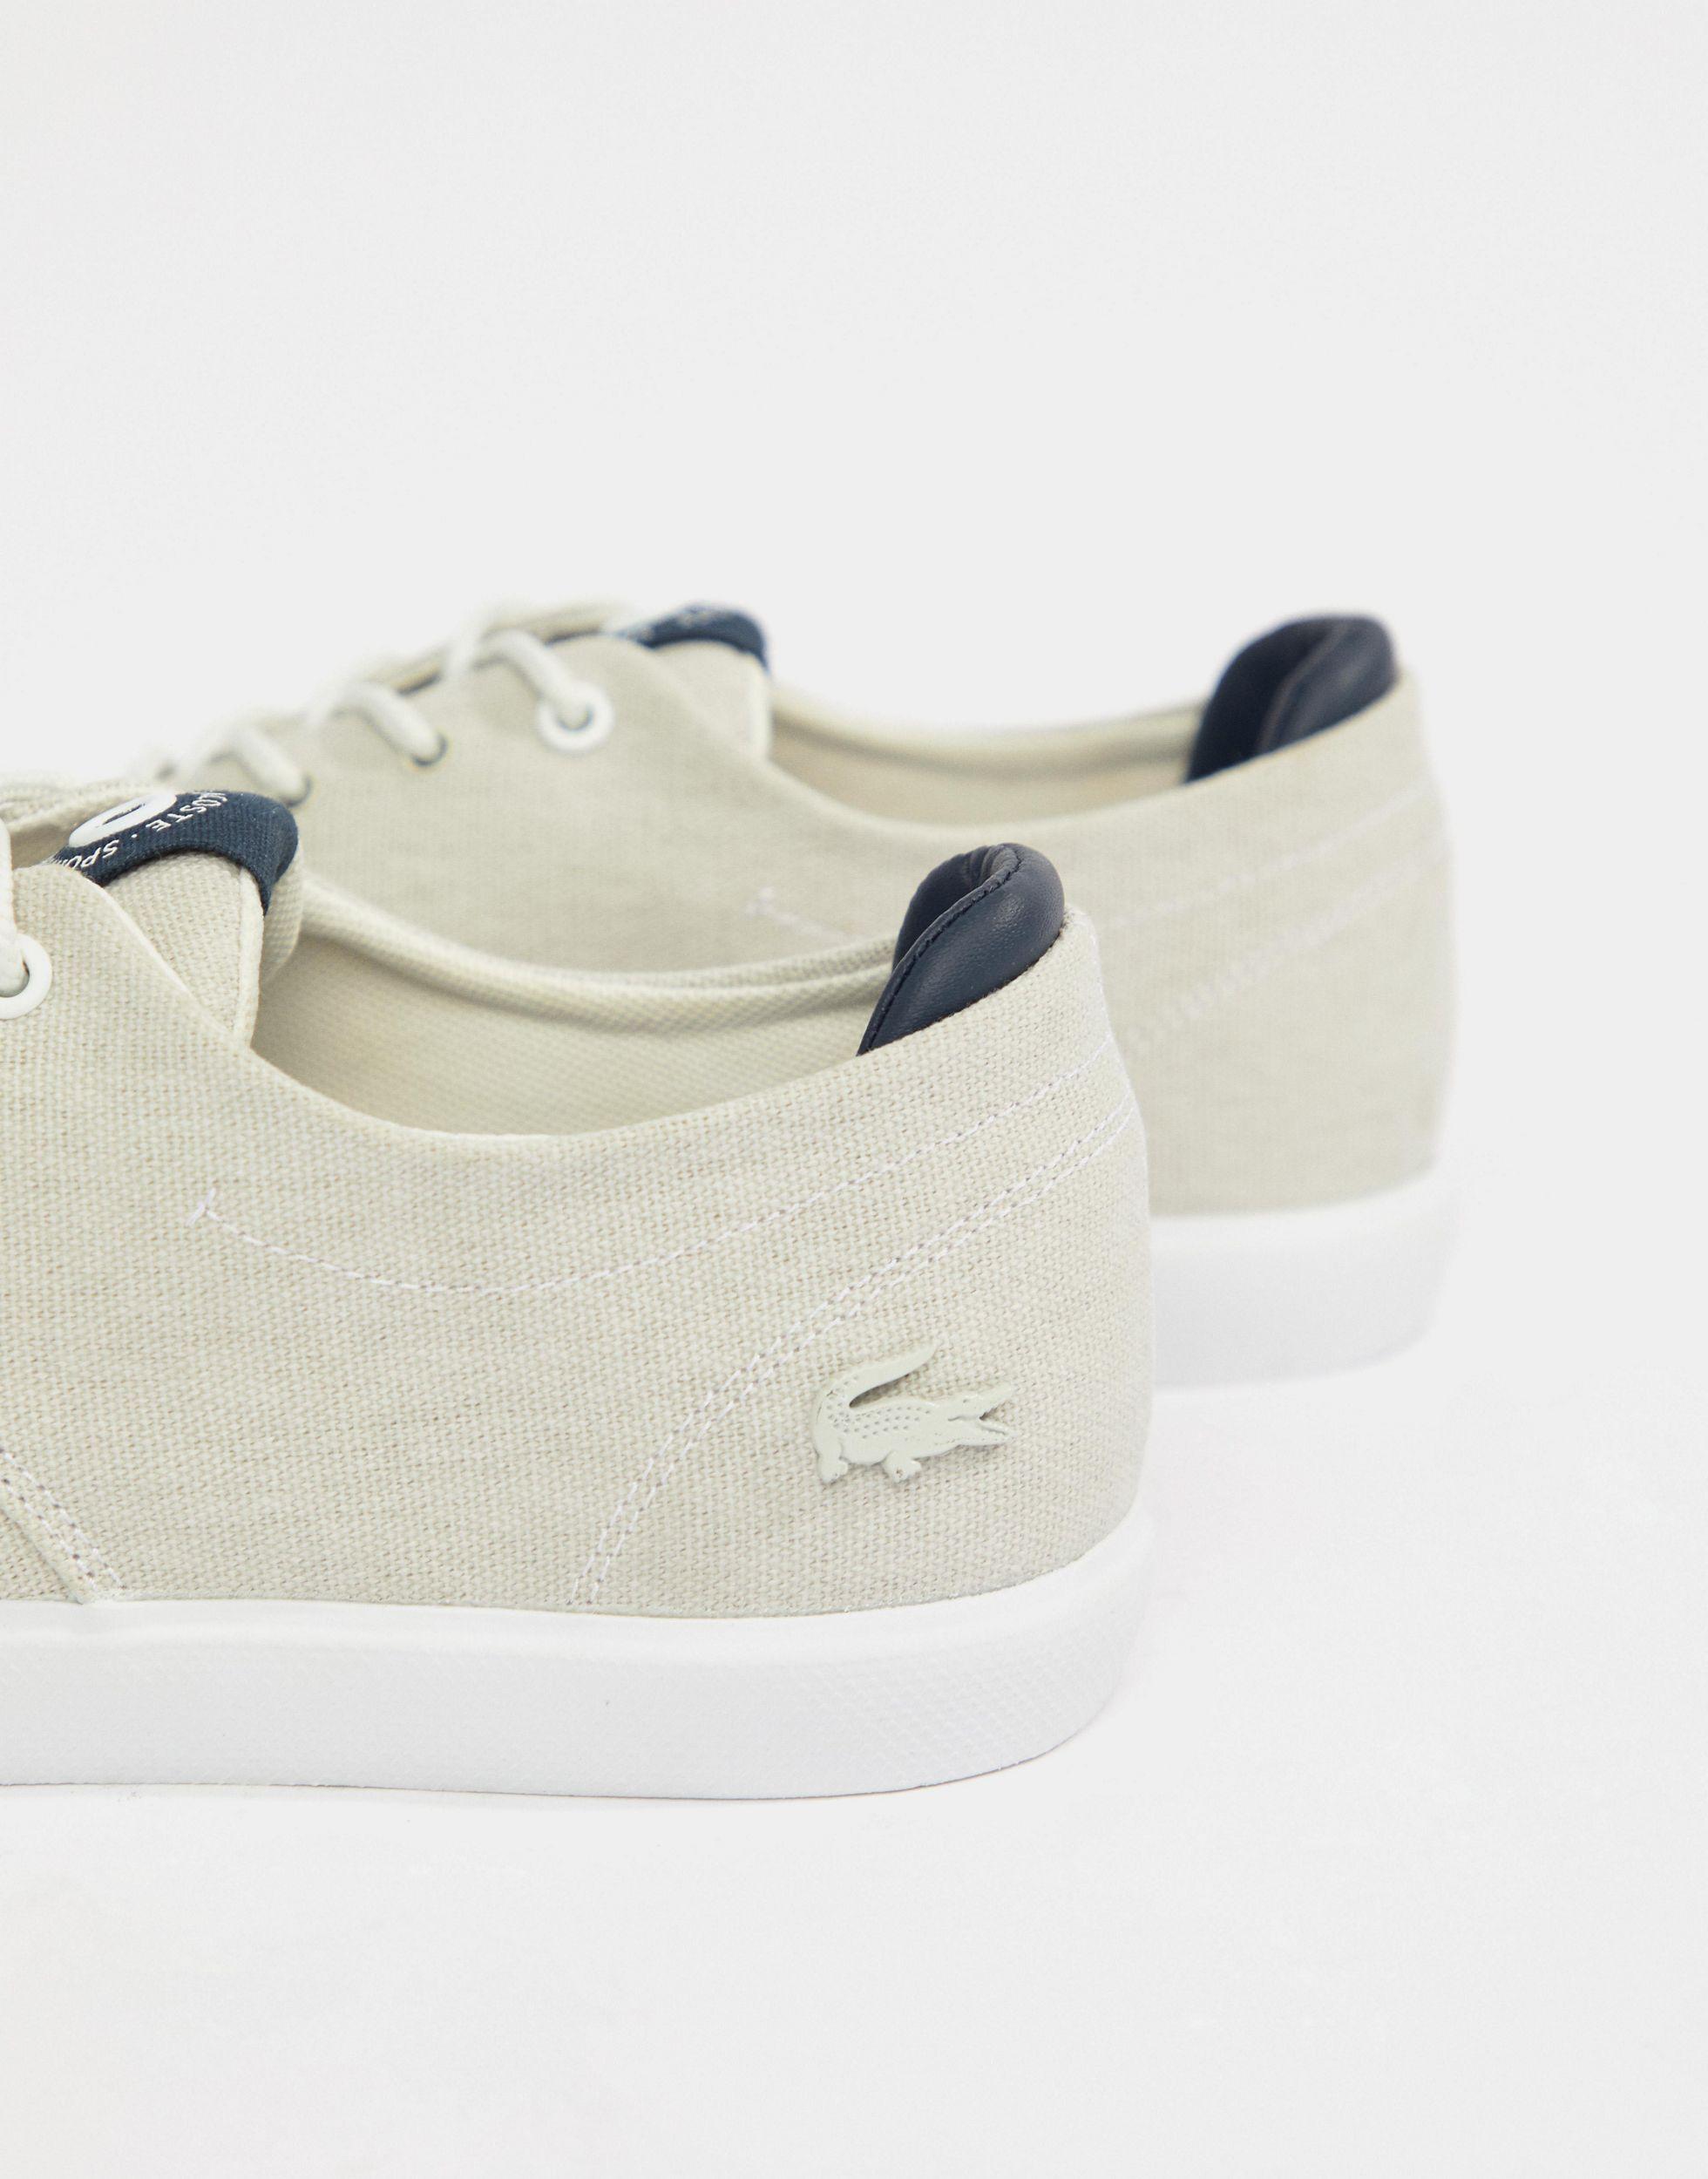 Lacoste Canvas Resort 123 1 CMA Canvas Trainers - Navy/Off White | Standout